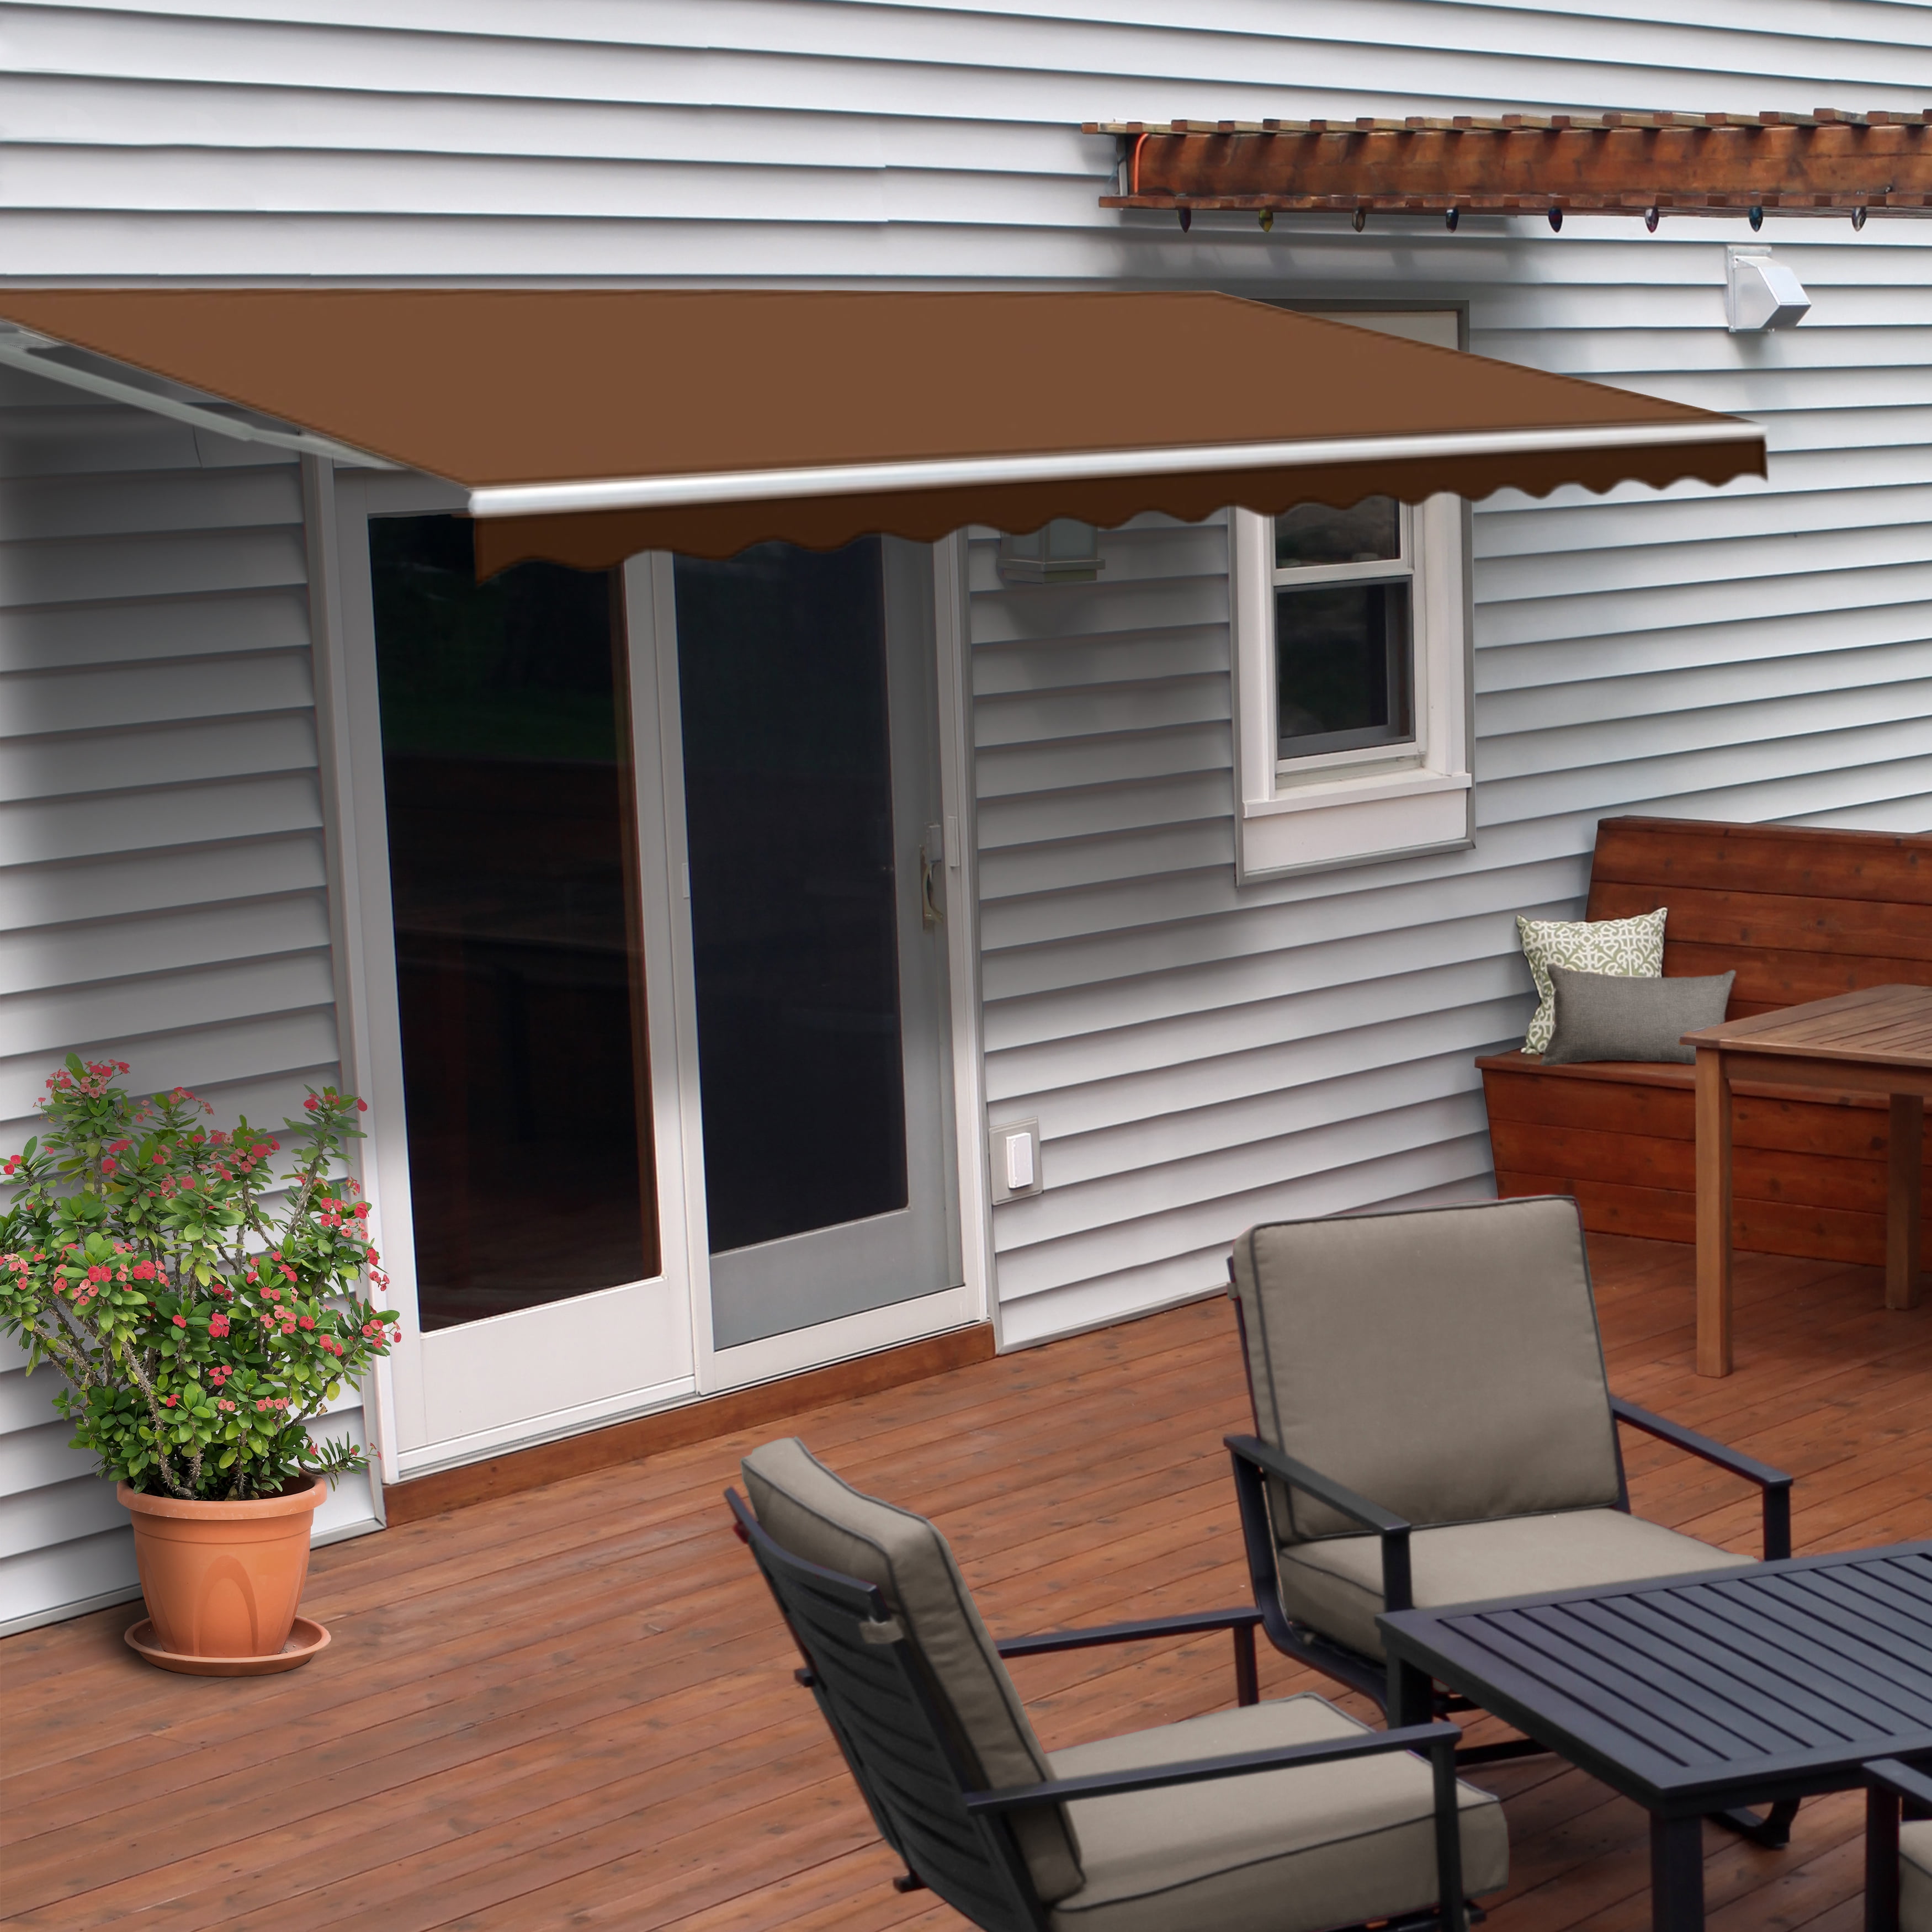 ALEKO Refurbished Black Frame Retractable Patio Canopy Awning 12 x 10 ft Sand 